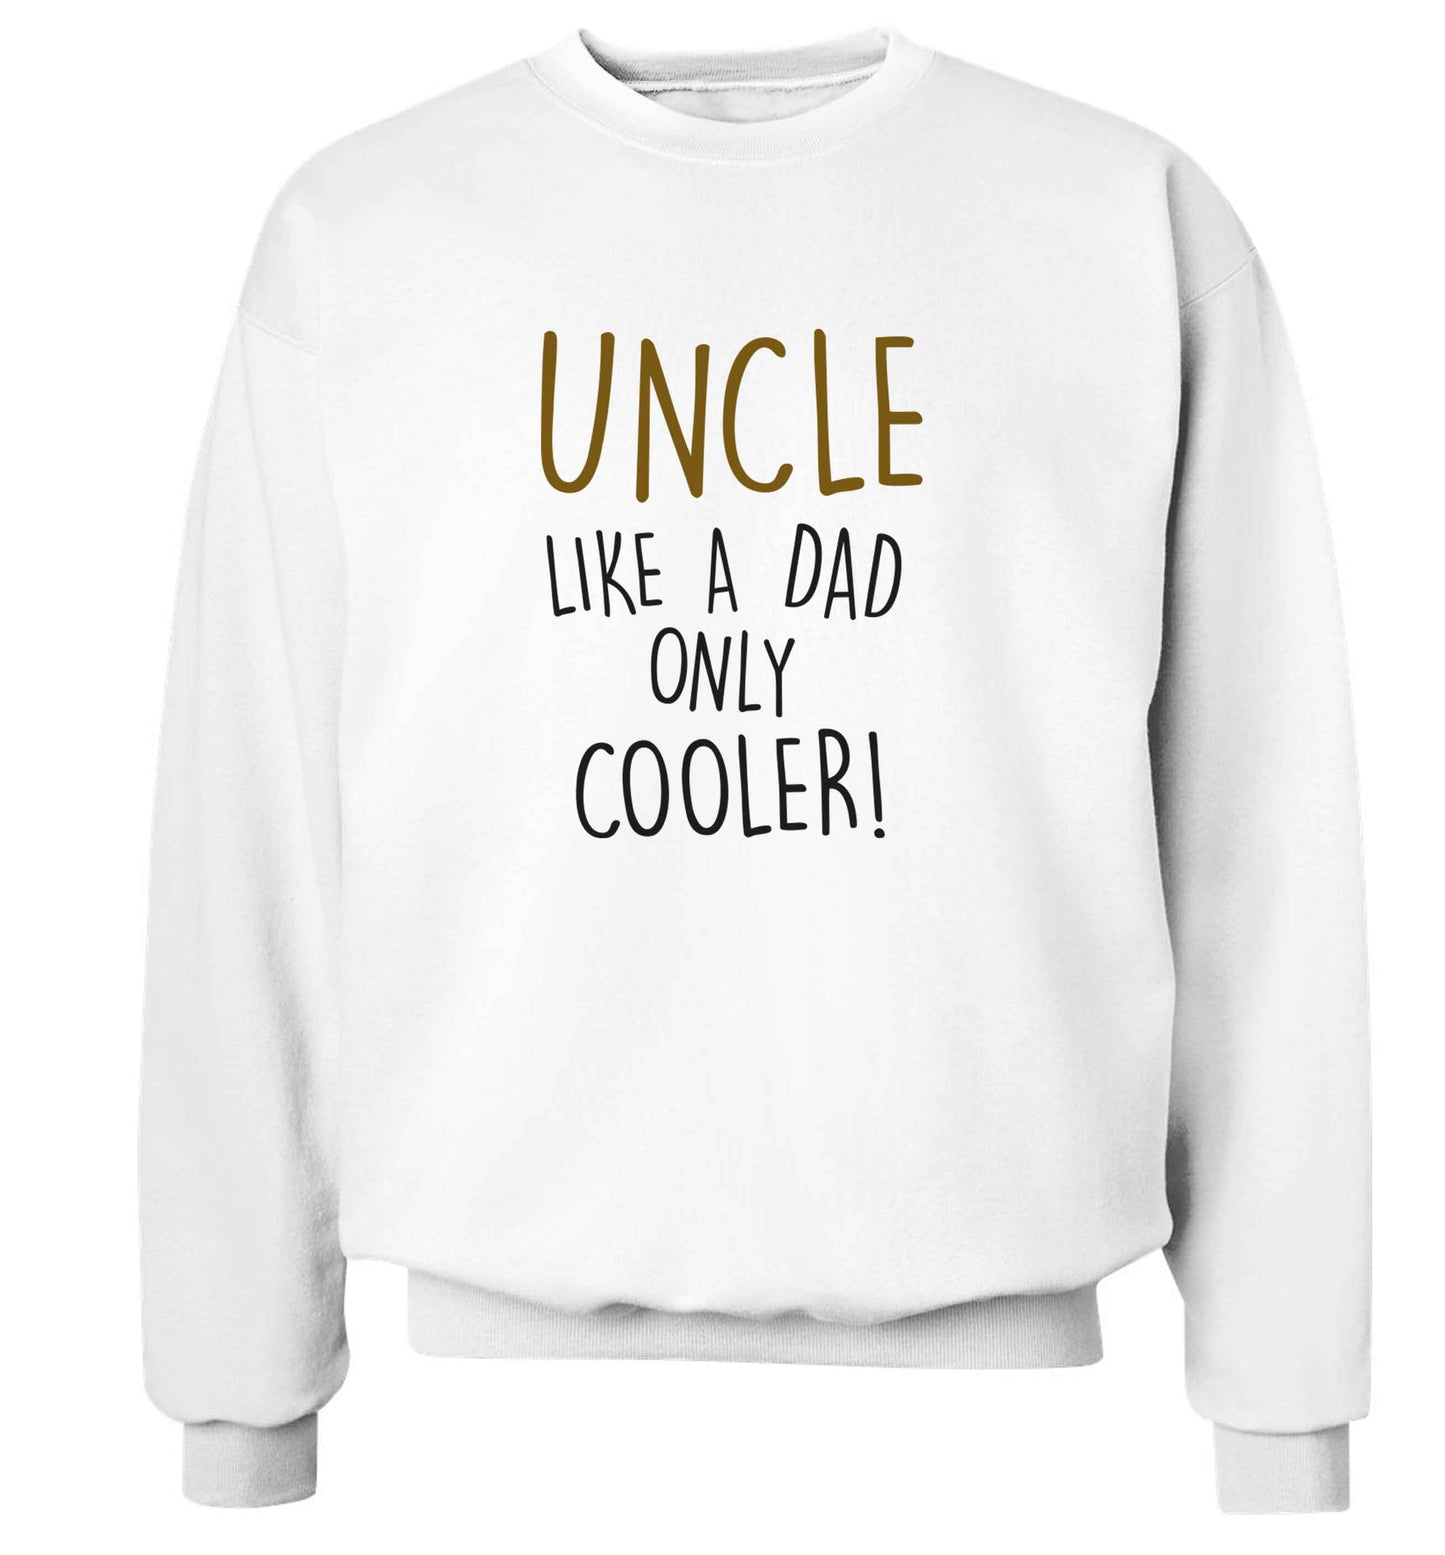 Uncle like a dad only cooler adult's unisex white sweater 2XL